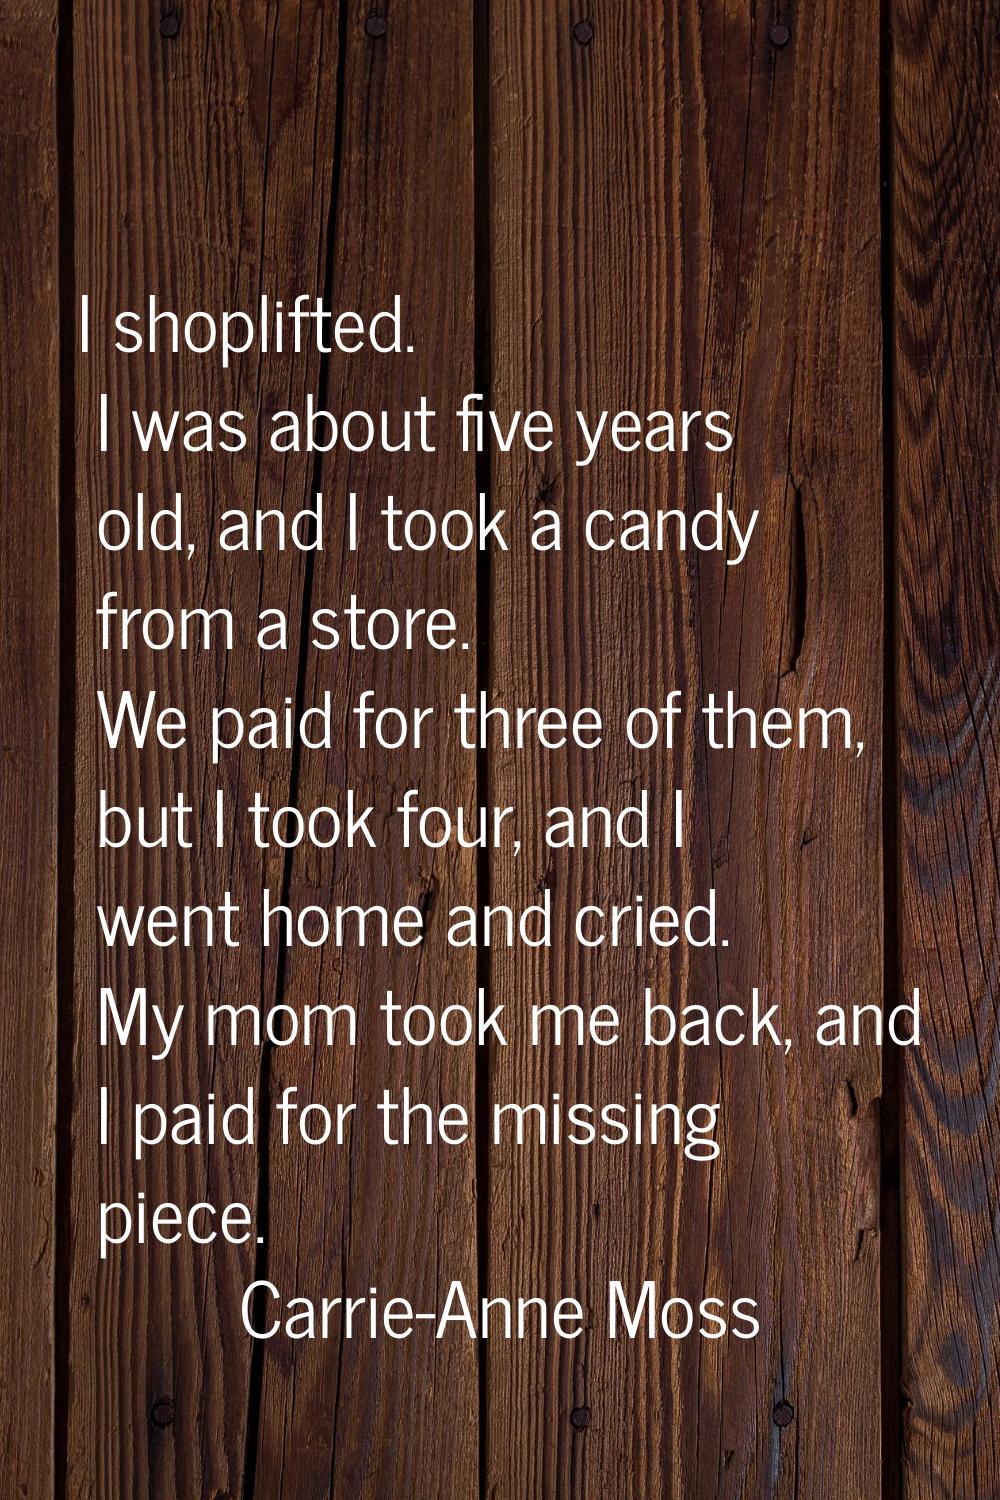 I shoplifted. I was about five years old, and I took a candy from a store. We paid for three of the